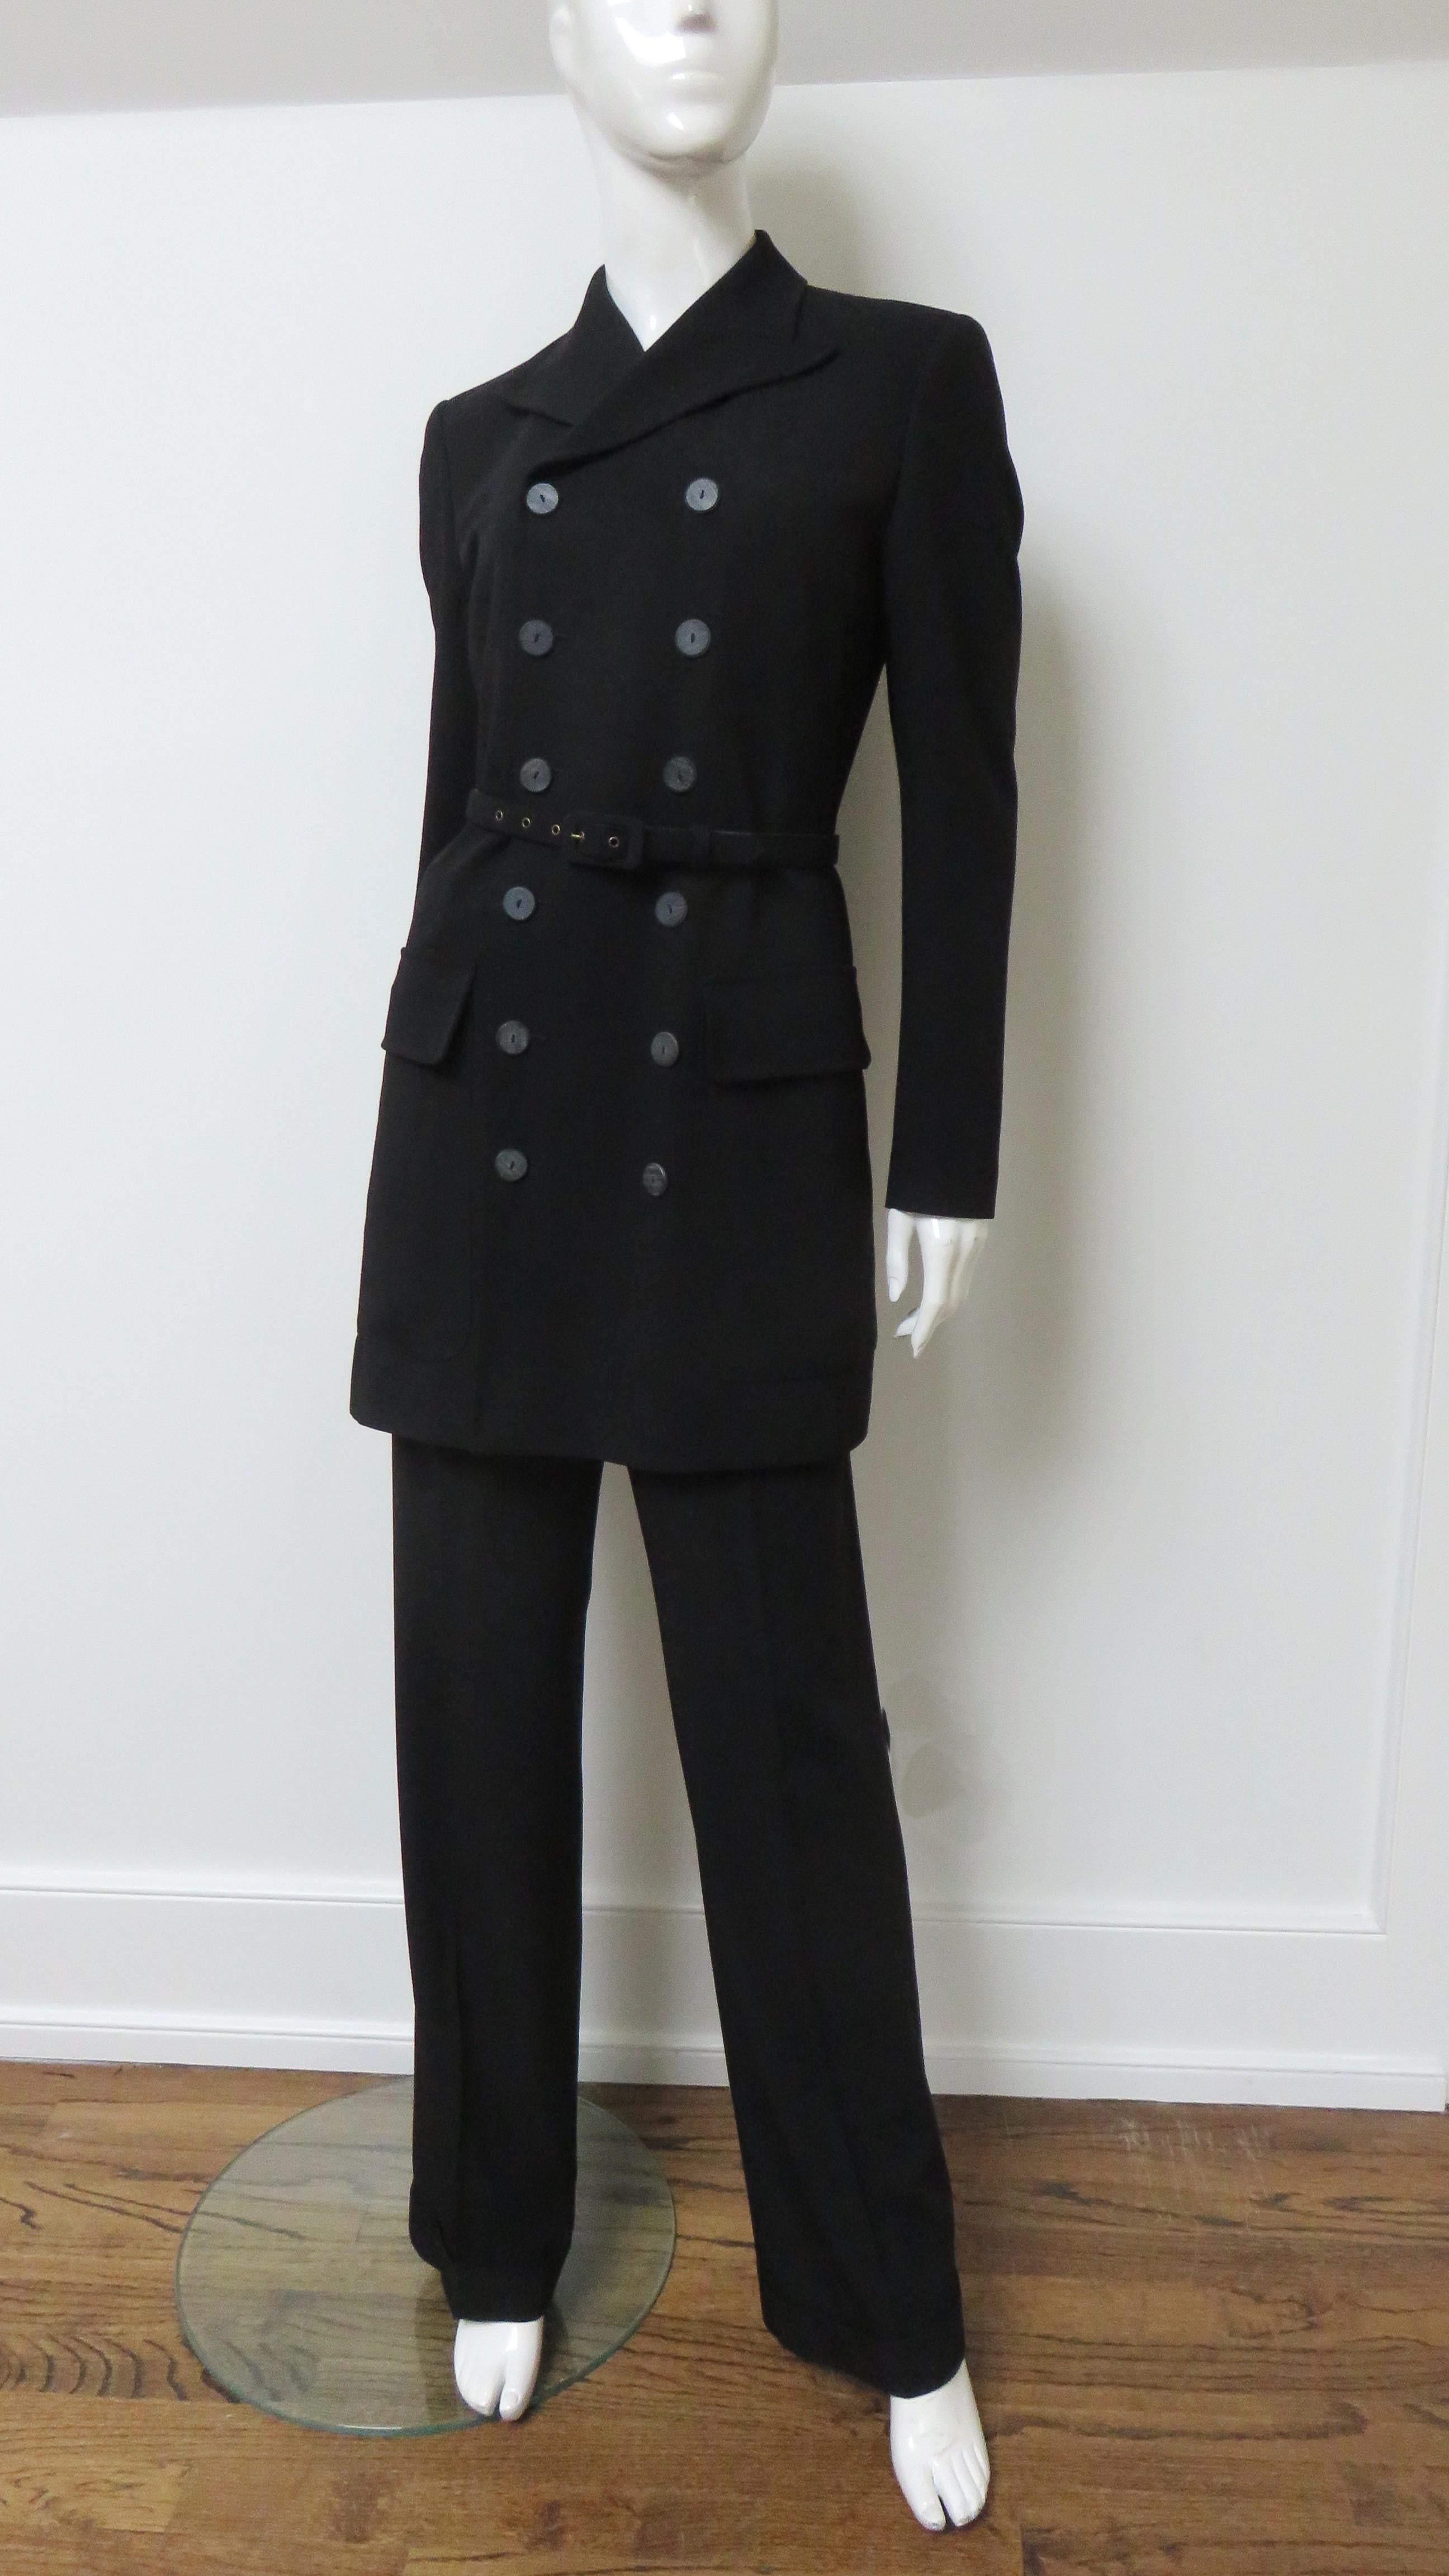 Jean Paul Gaultier Double Breasted Belted Pant Suit A/W 1999 In Excellent Condition For Sale In Water Mill, NY